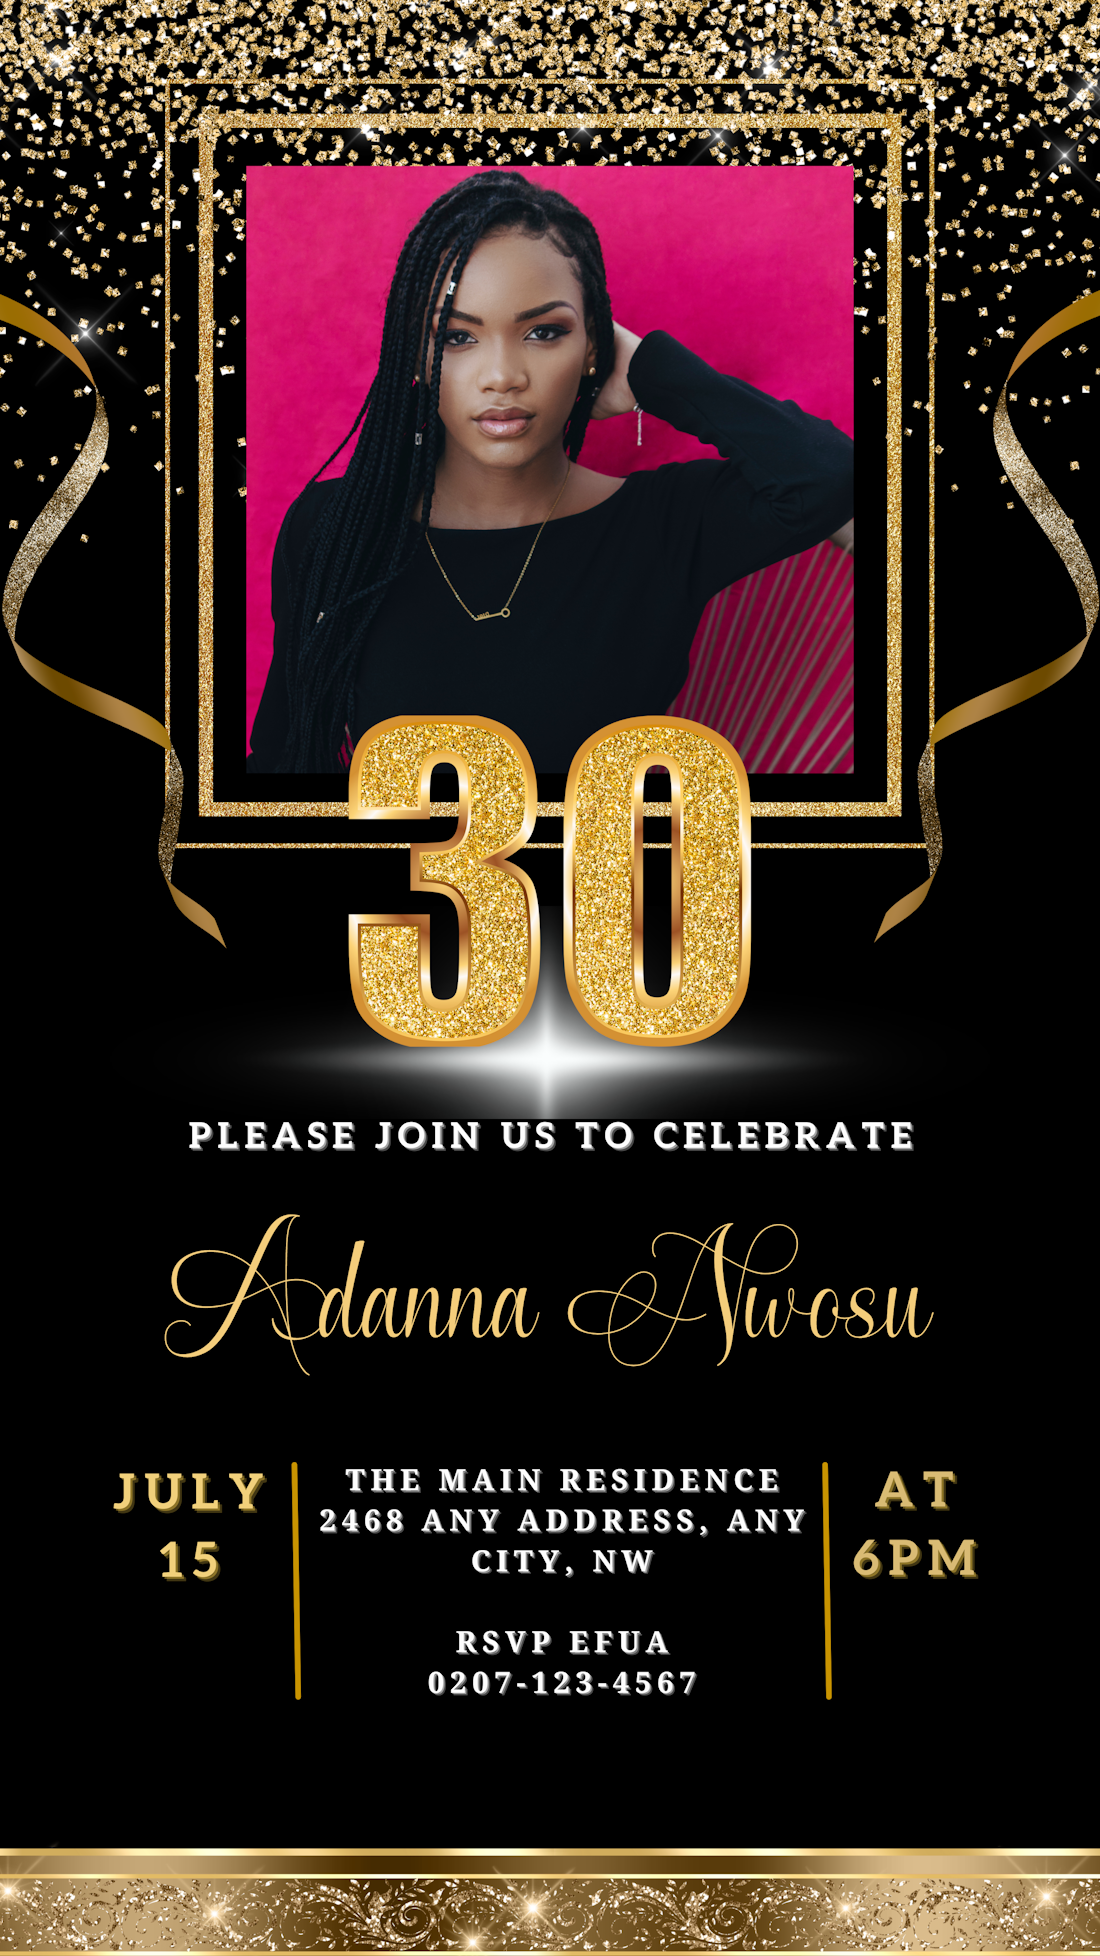 Black Gold Confetti W/Photo | 30th Birthday Evite featuring a woman in a black shirt with gold text and confetti accents, customizable via Canva.